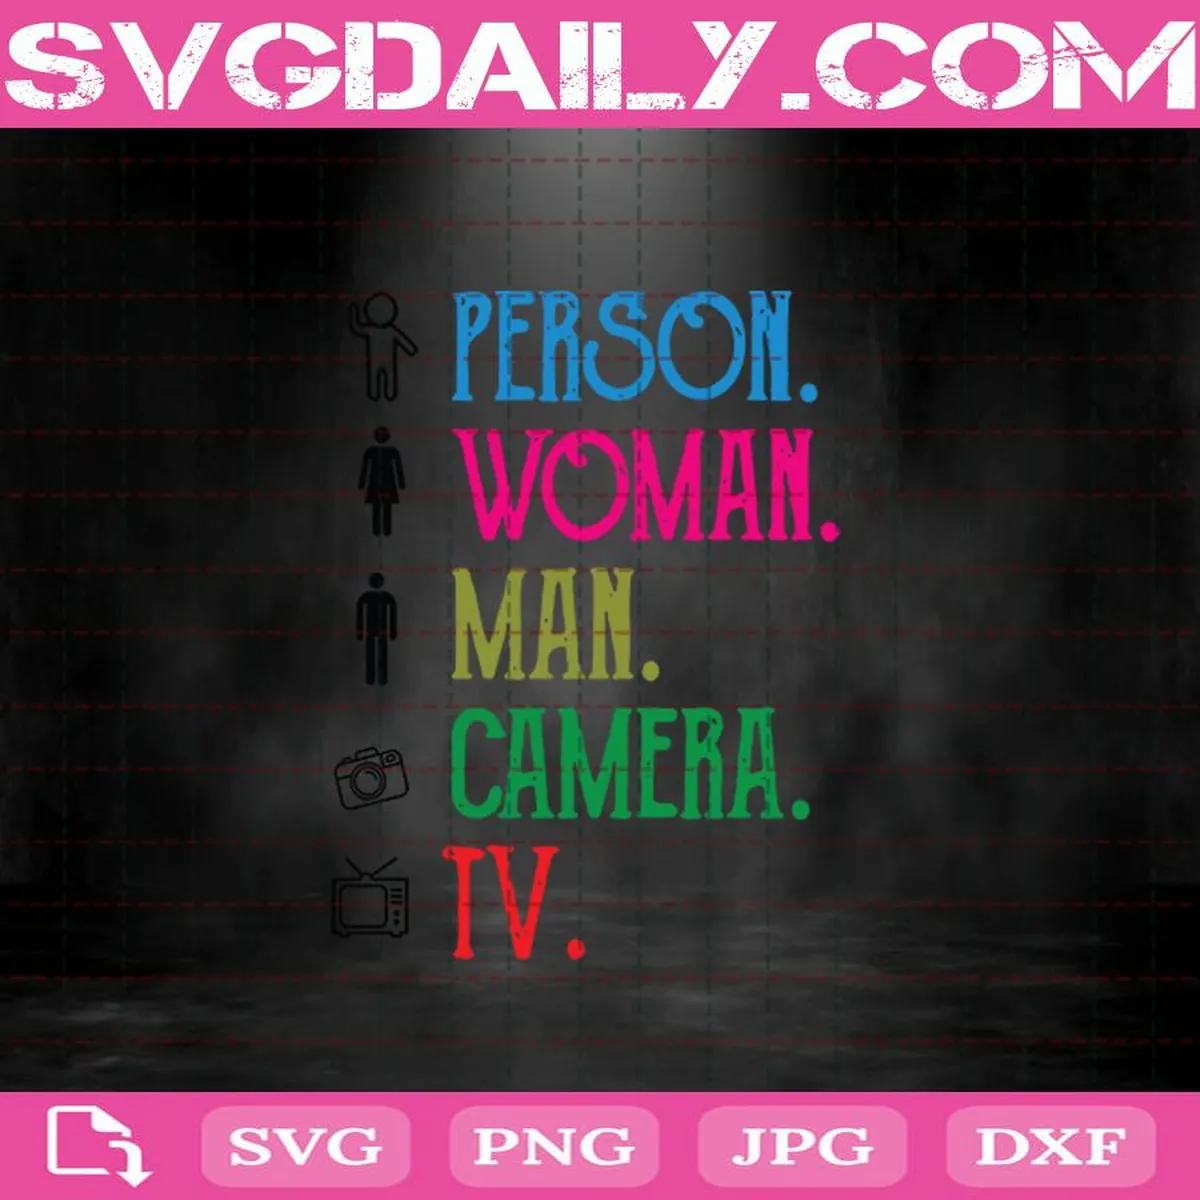 Person Woman Man Camera TV Song Svg, Funny Song Svg, Quotes President Svg Png Dxf Eps Cut File Instant Download